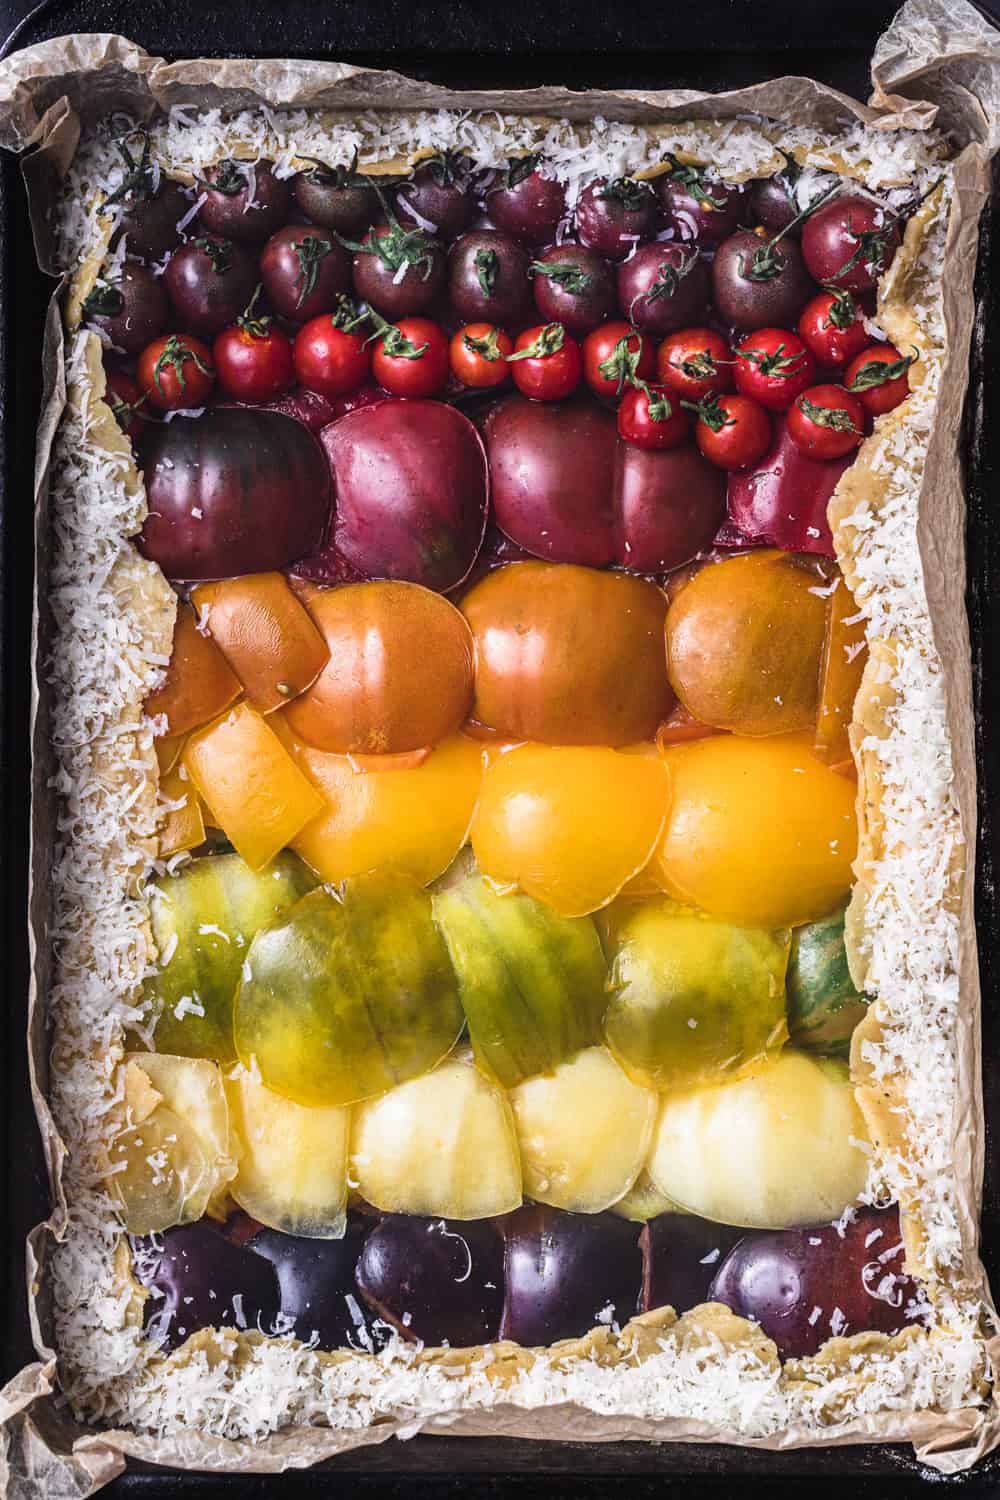 a raw tomato galette, with colorful red, orange, yellow, green and purple tomatoes arranged like a rainbow.